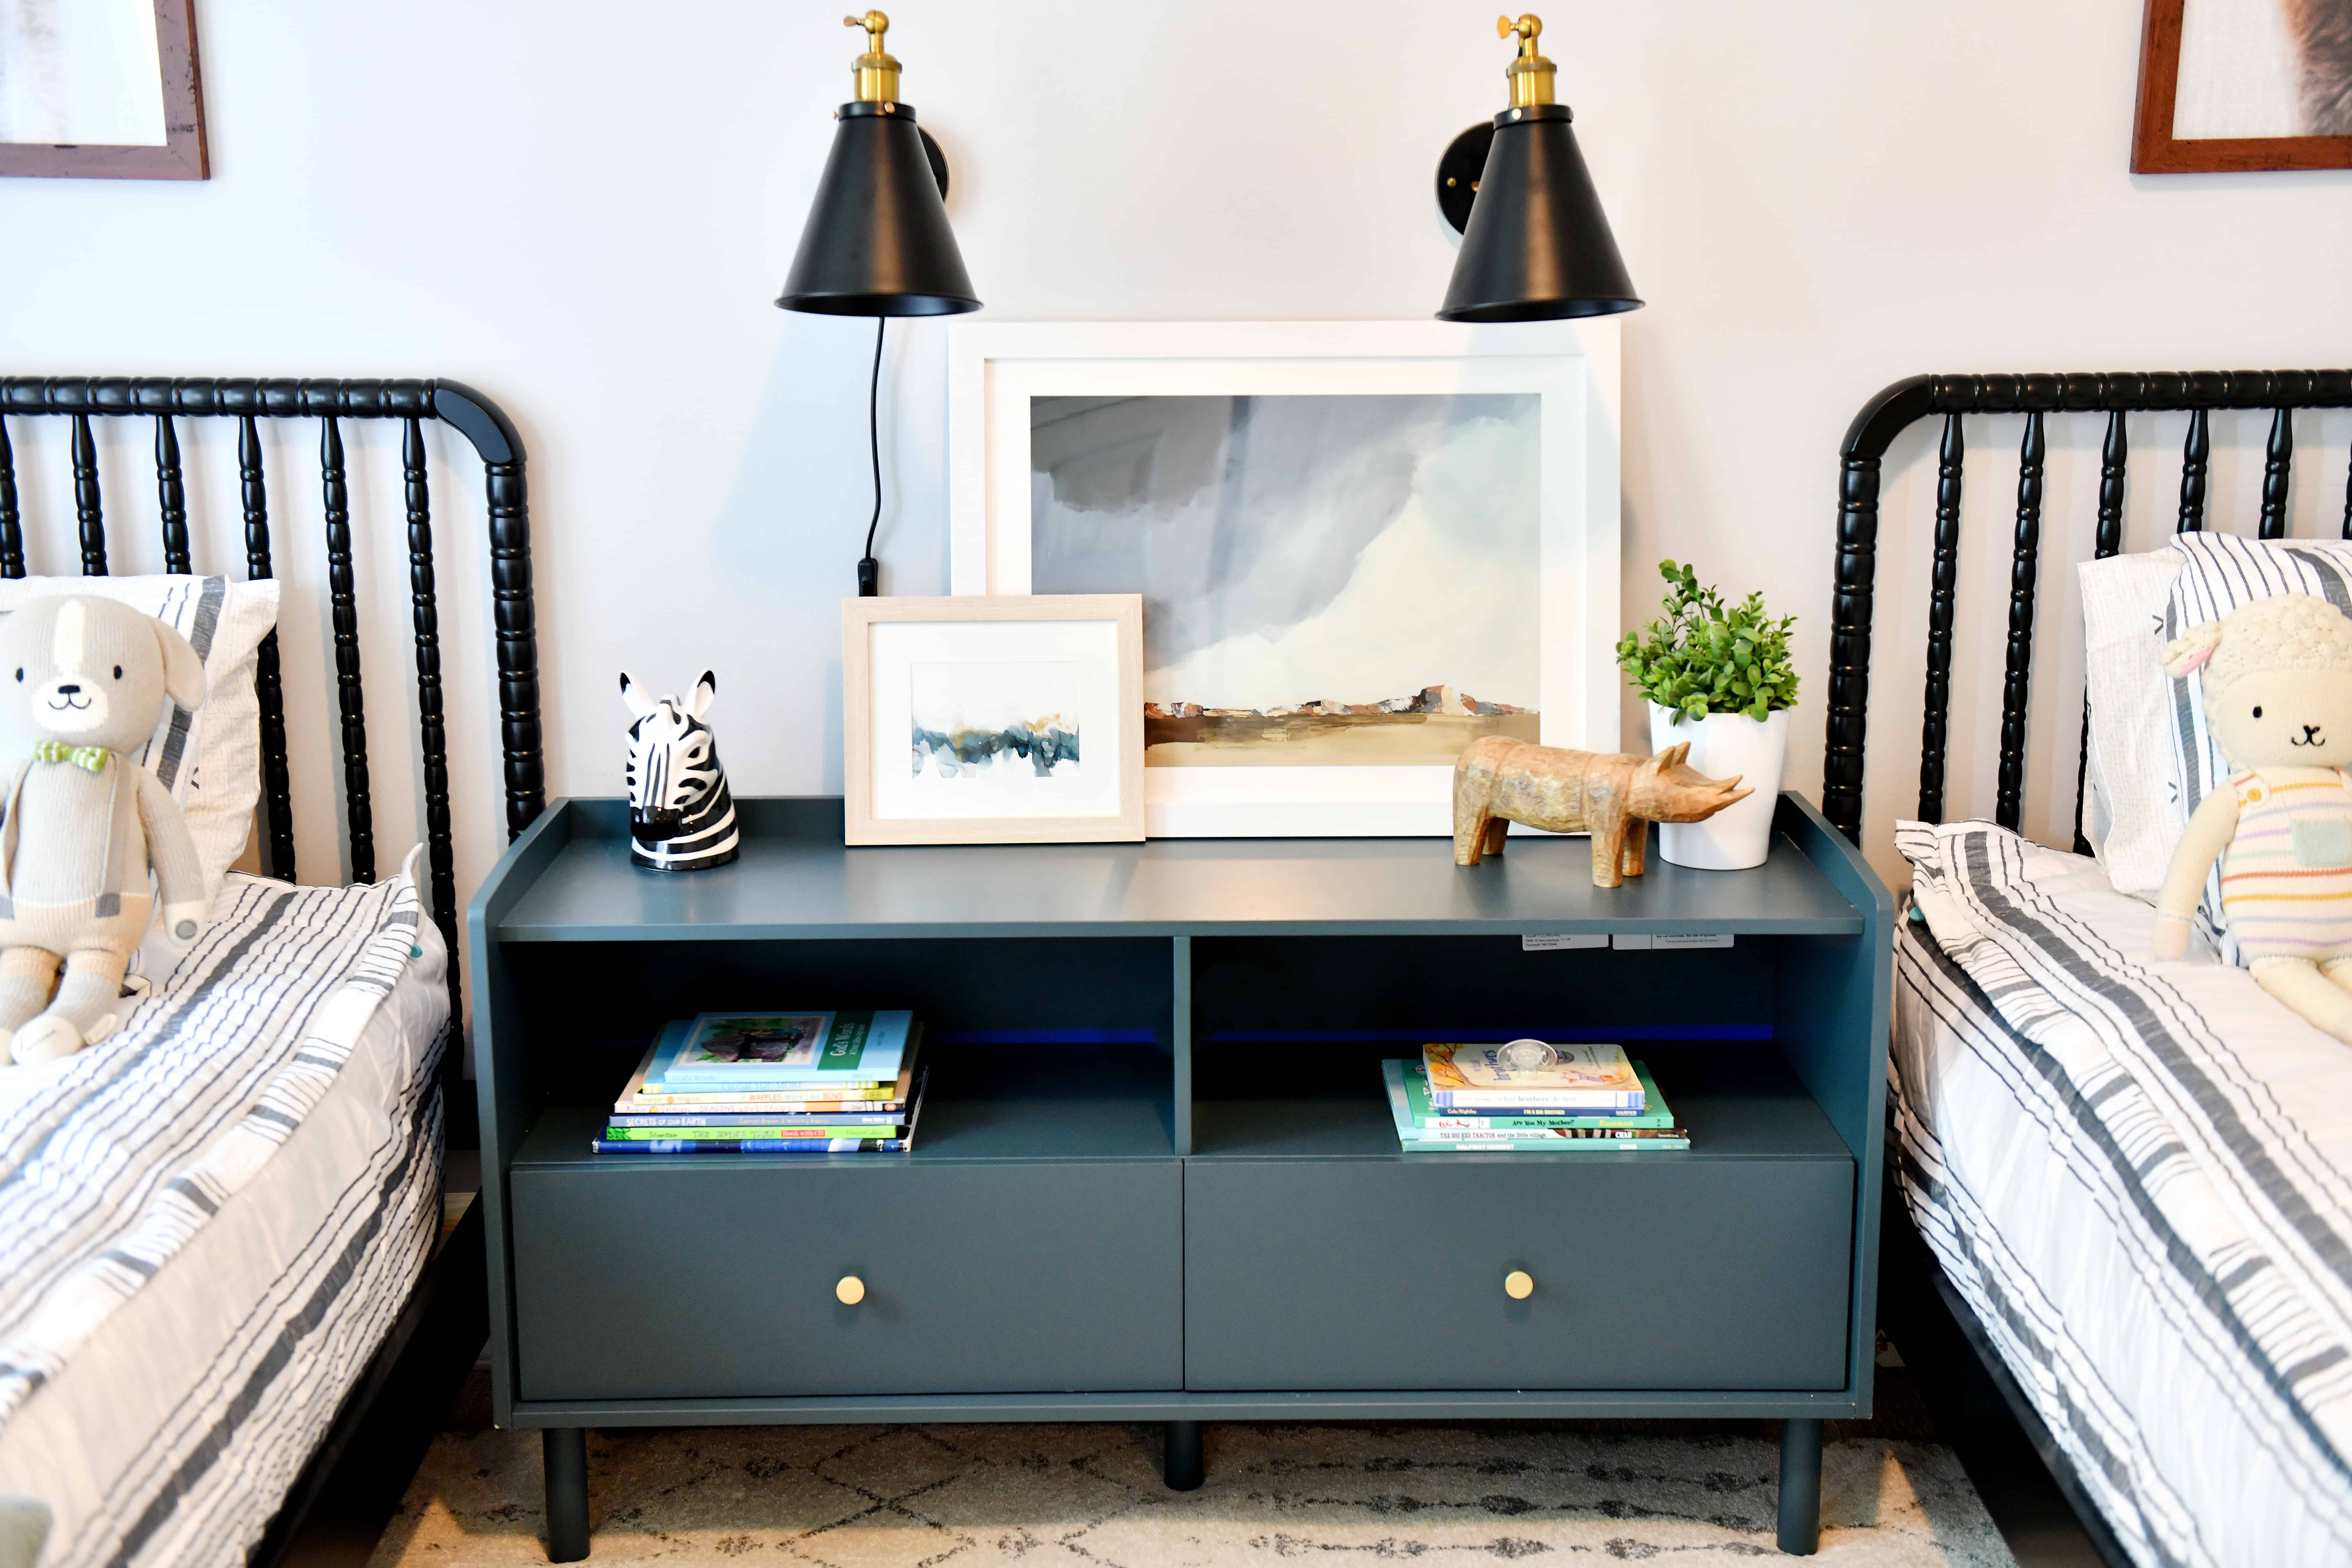 Green Tv Stand as dresser between two beds